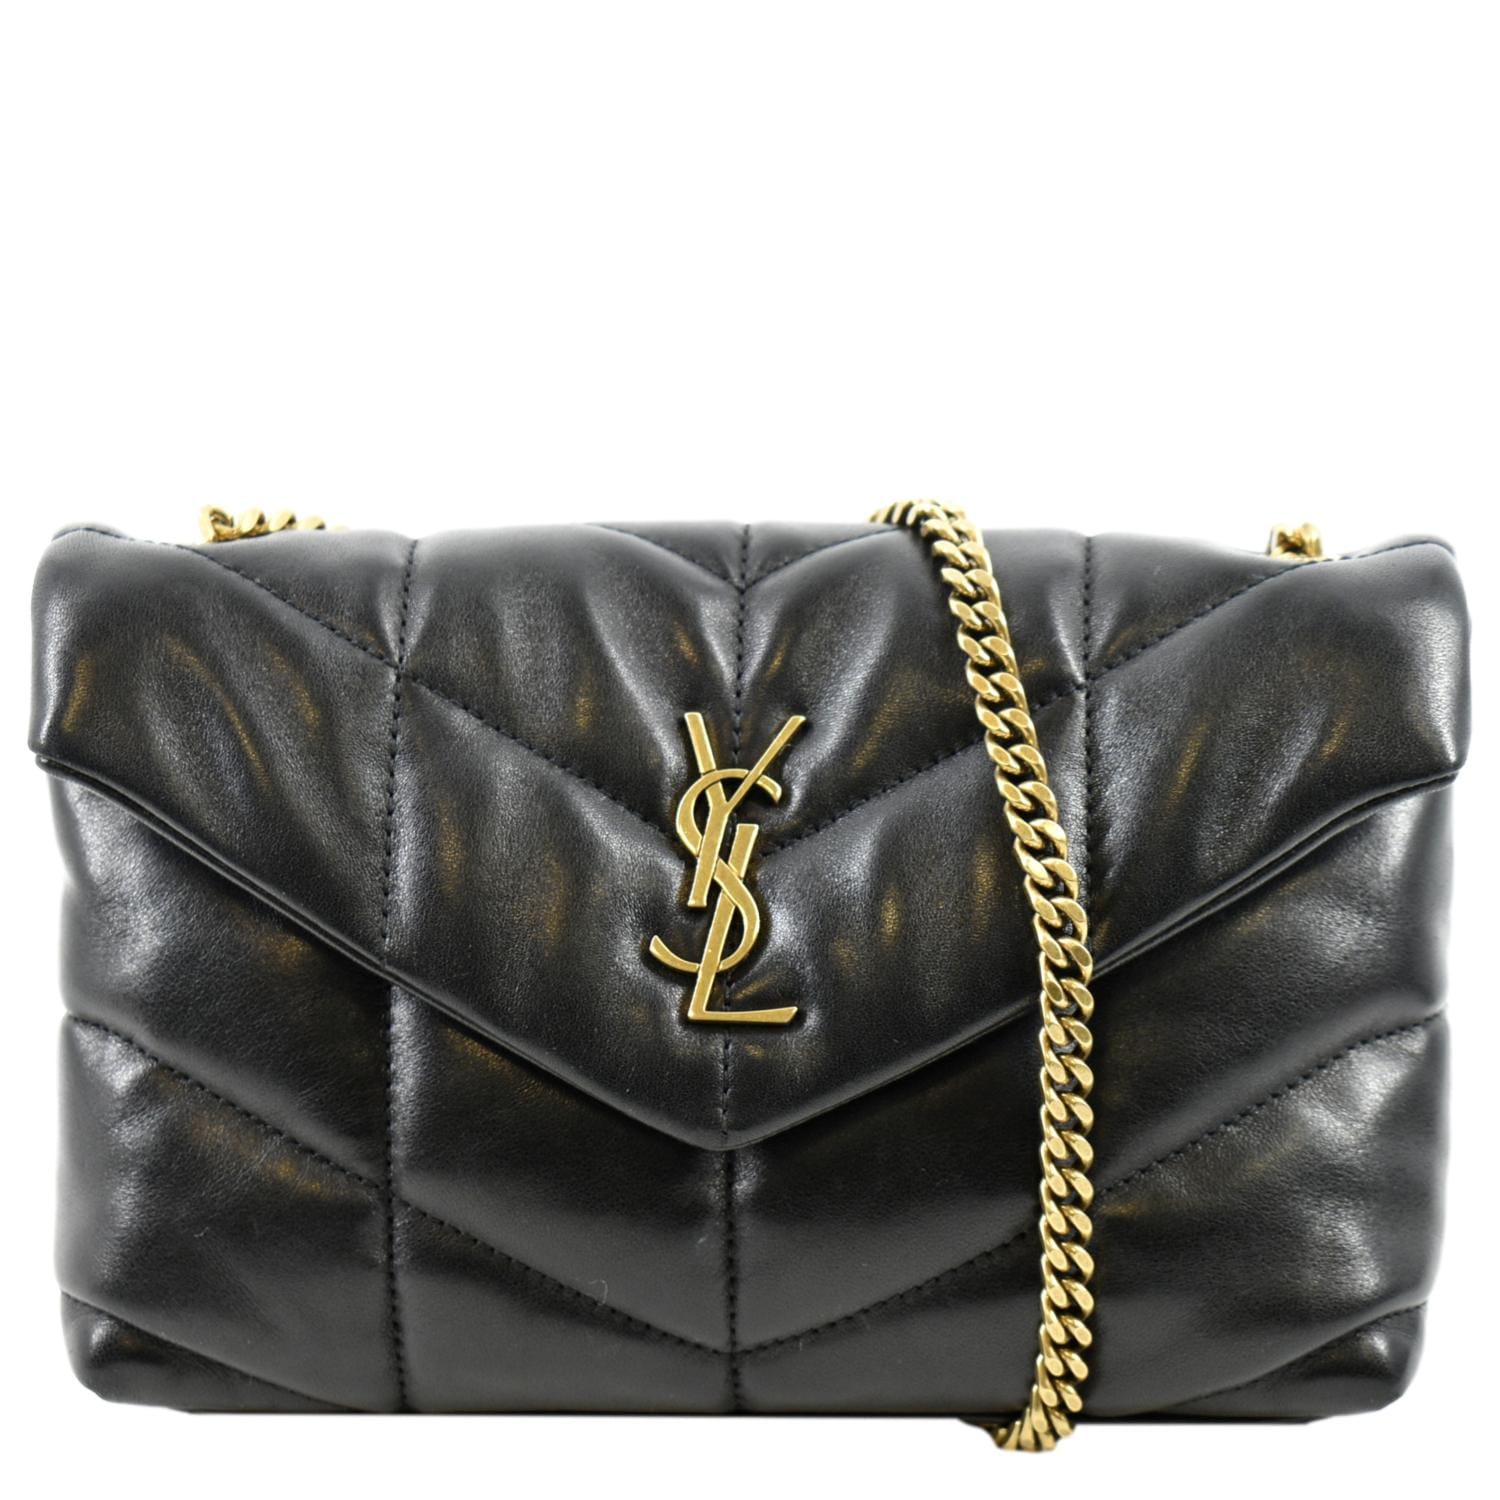 Saint Laurent Loulou Toy Puffer Leather Crossbody Bag